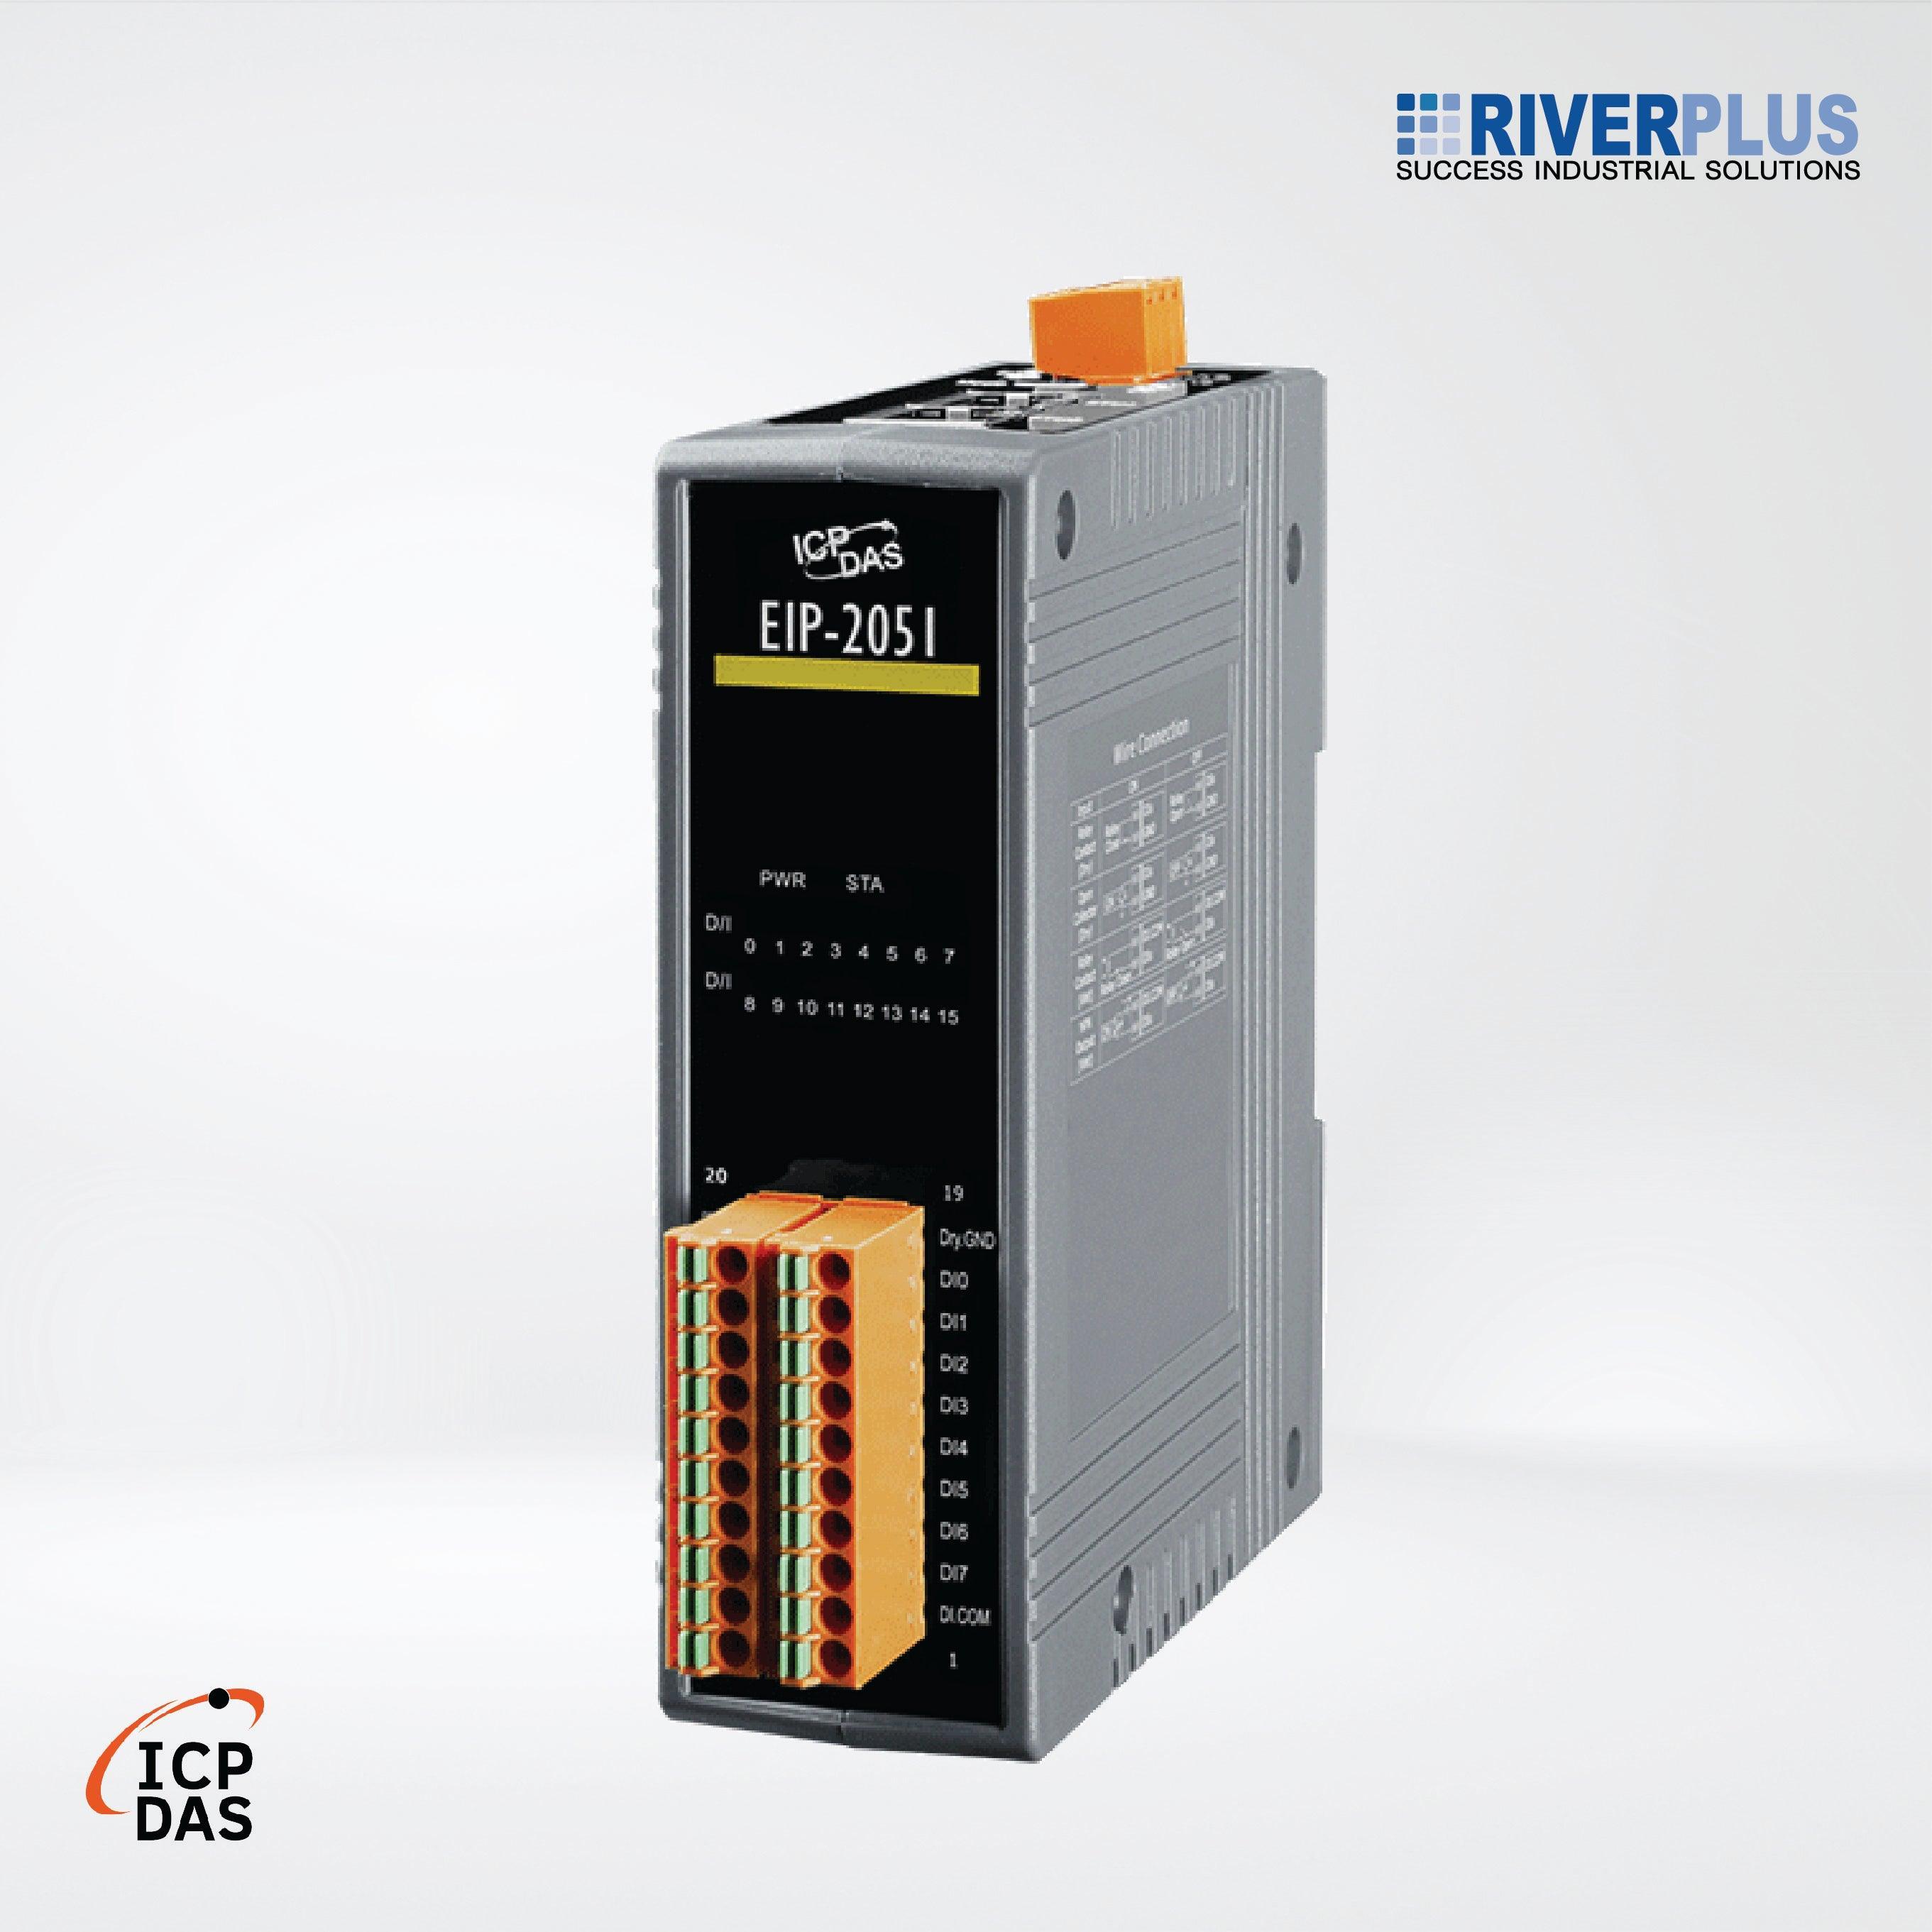 EIP-2051 EtherNet/IP Module (Isolated 16-ch DI) - Riverplus